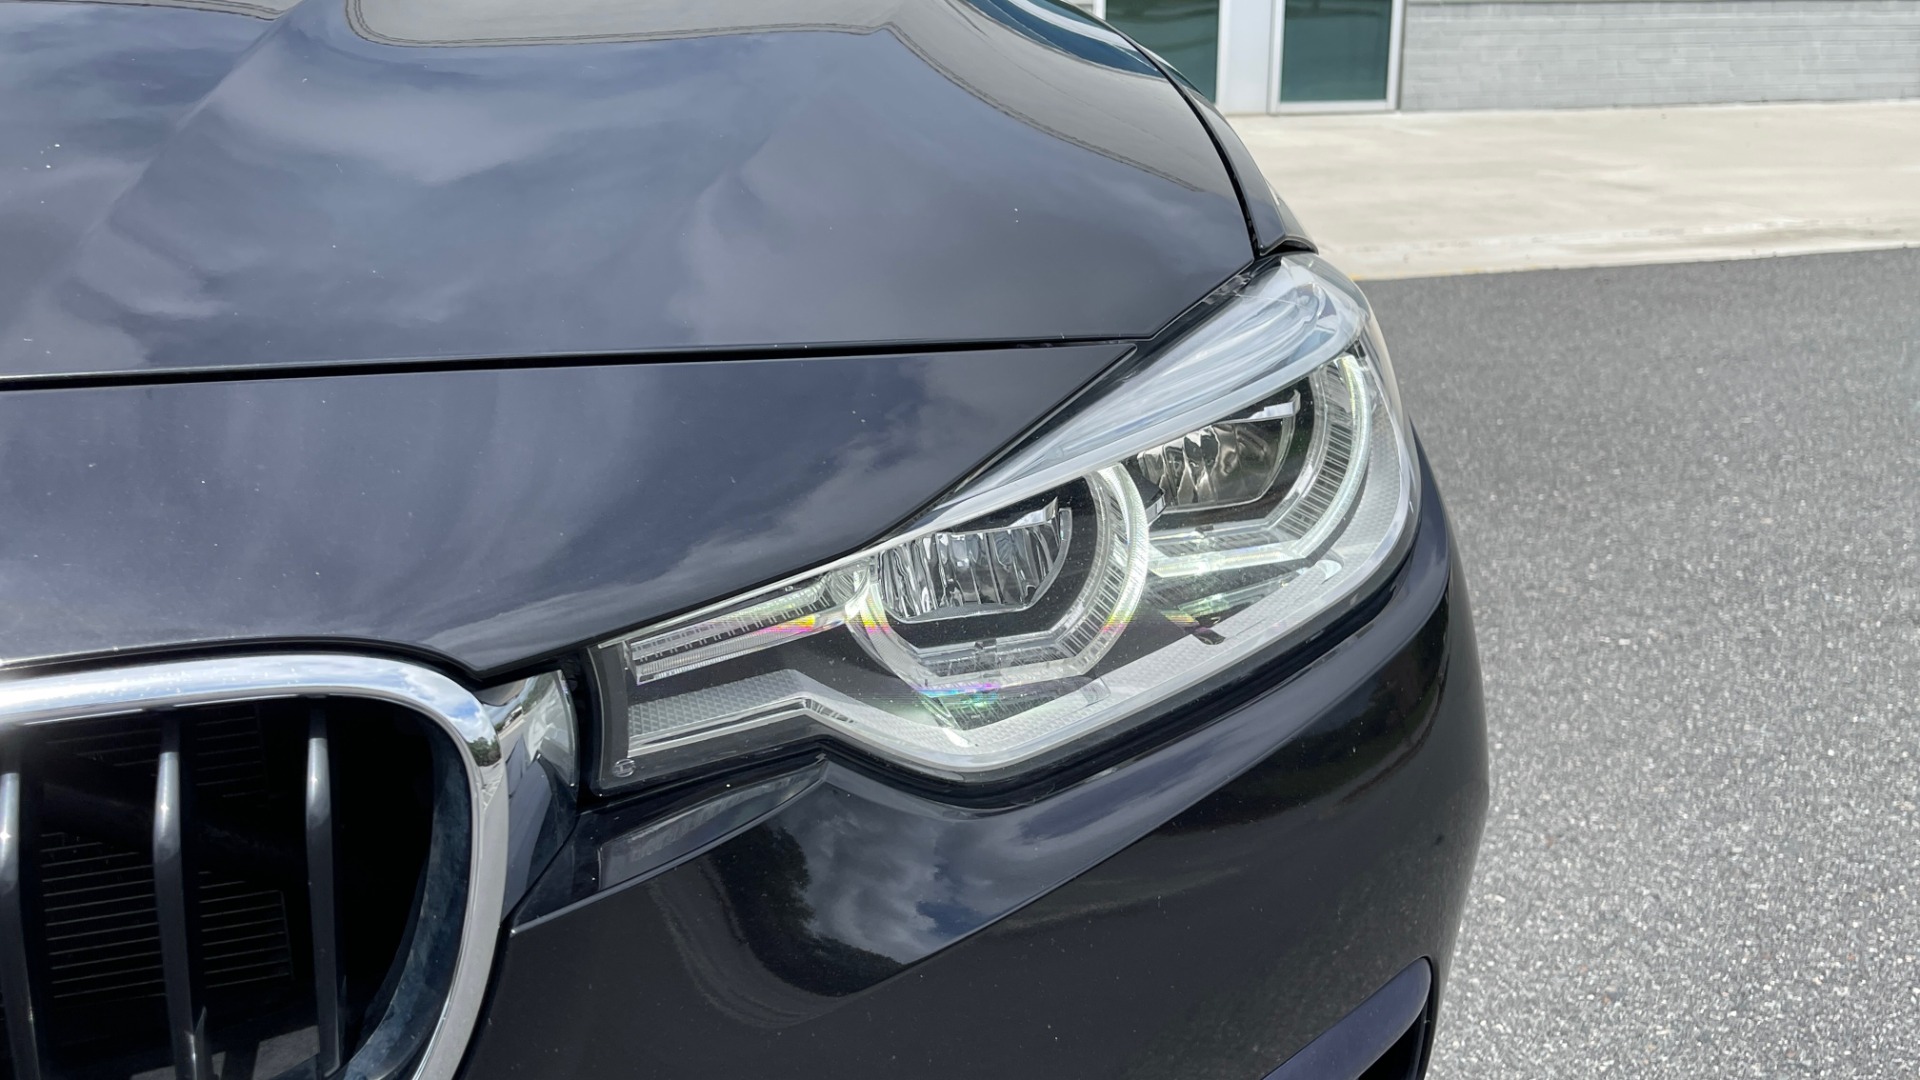 Used 2018 BMW 3 SERIES 330IXDRIVE 2.0L SEDAN / NAV / CONV PKG / ABSD / SUNROOF / REARVIEW for sale Sold at Formula Imports in Charlotte NC 28227 13